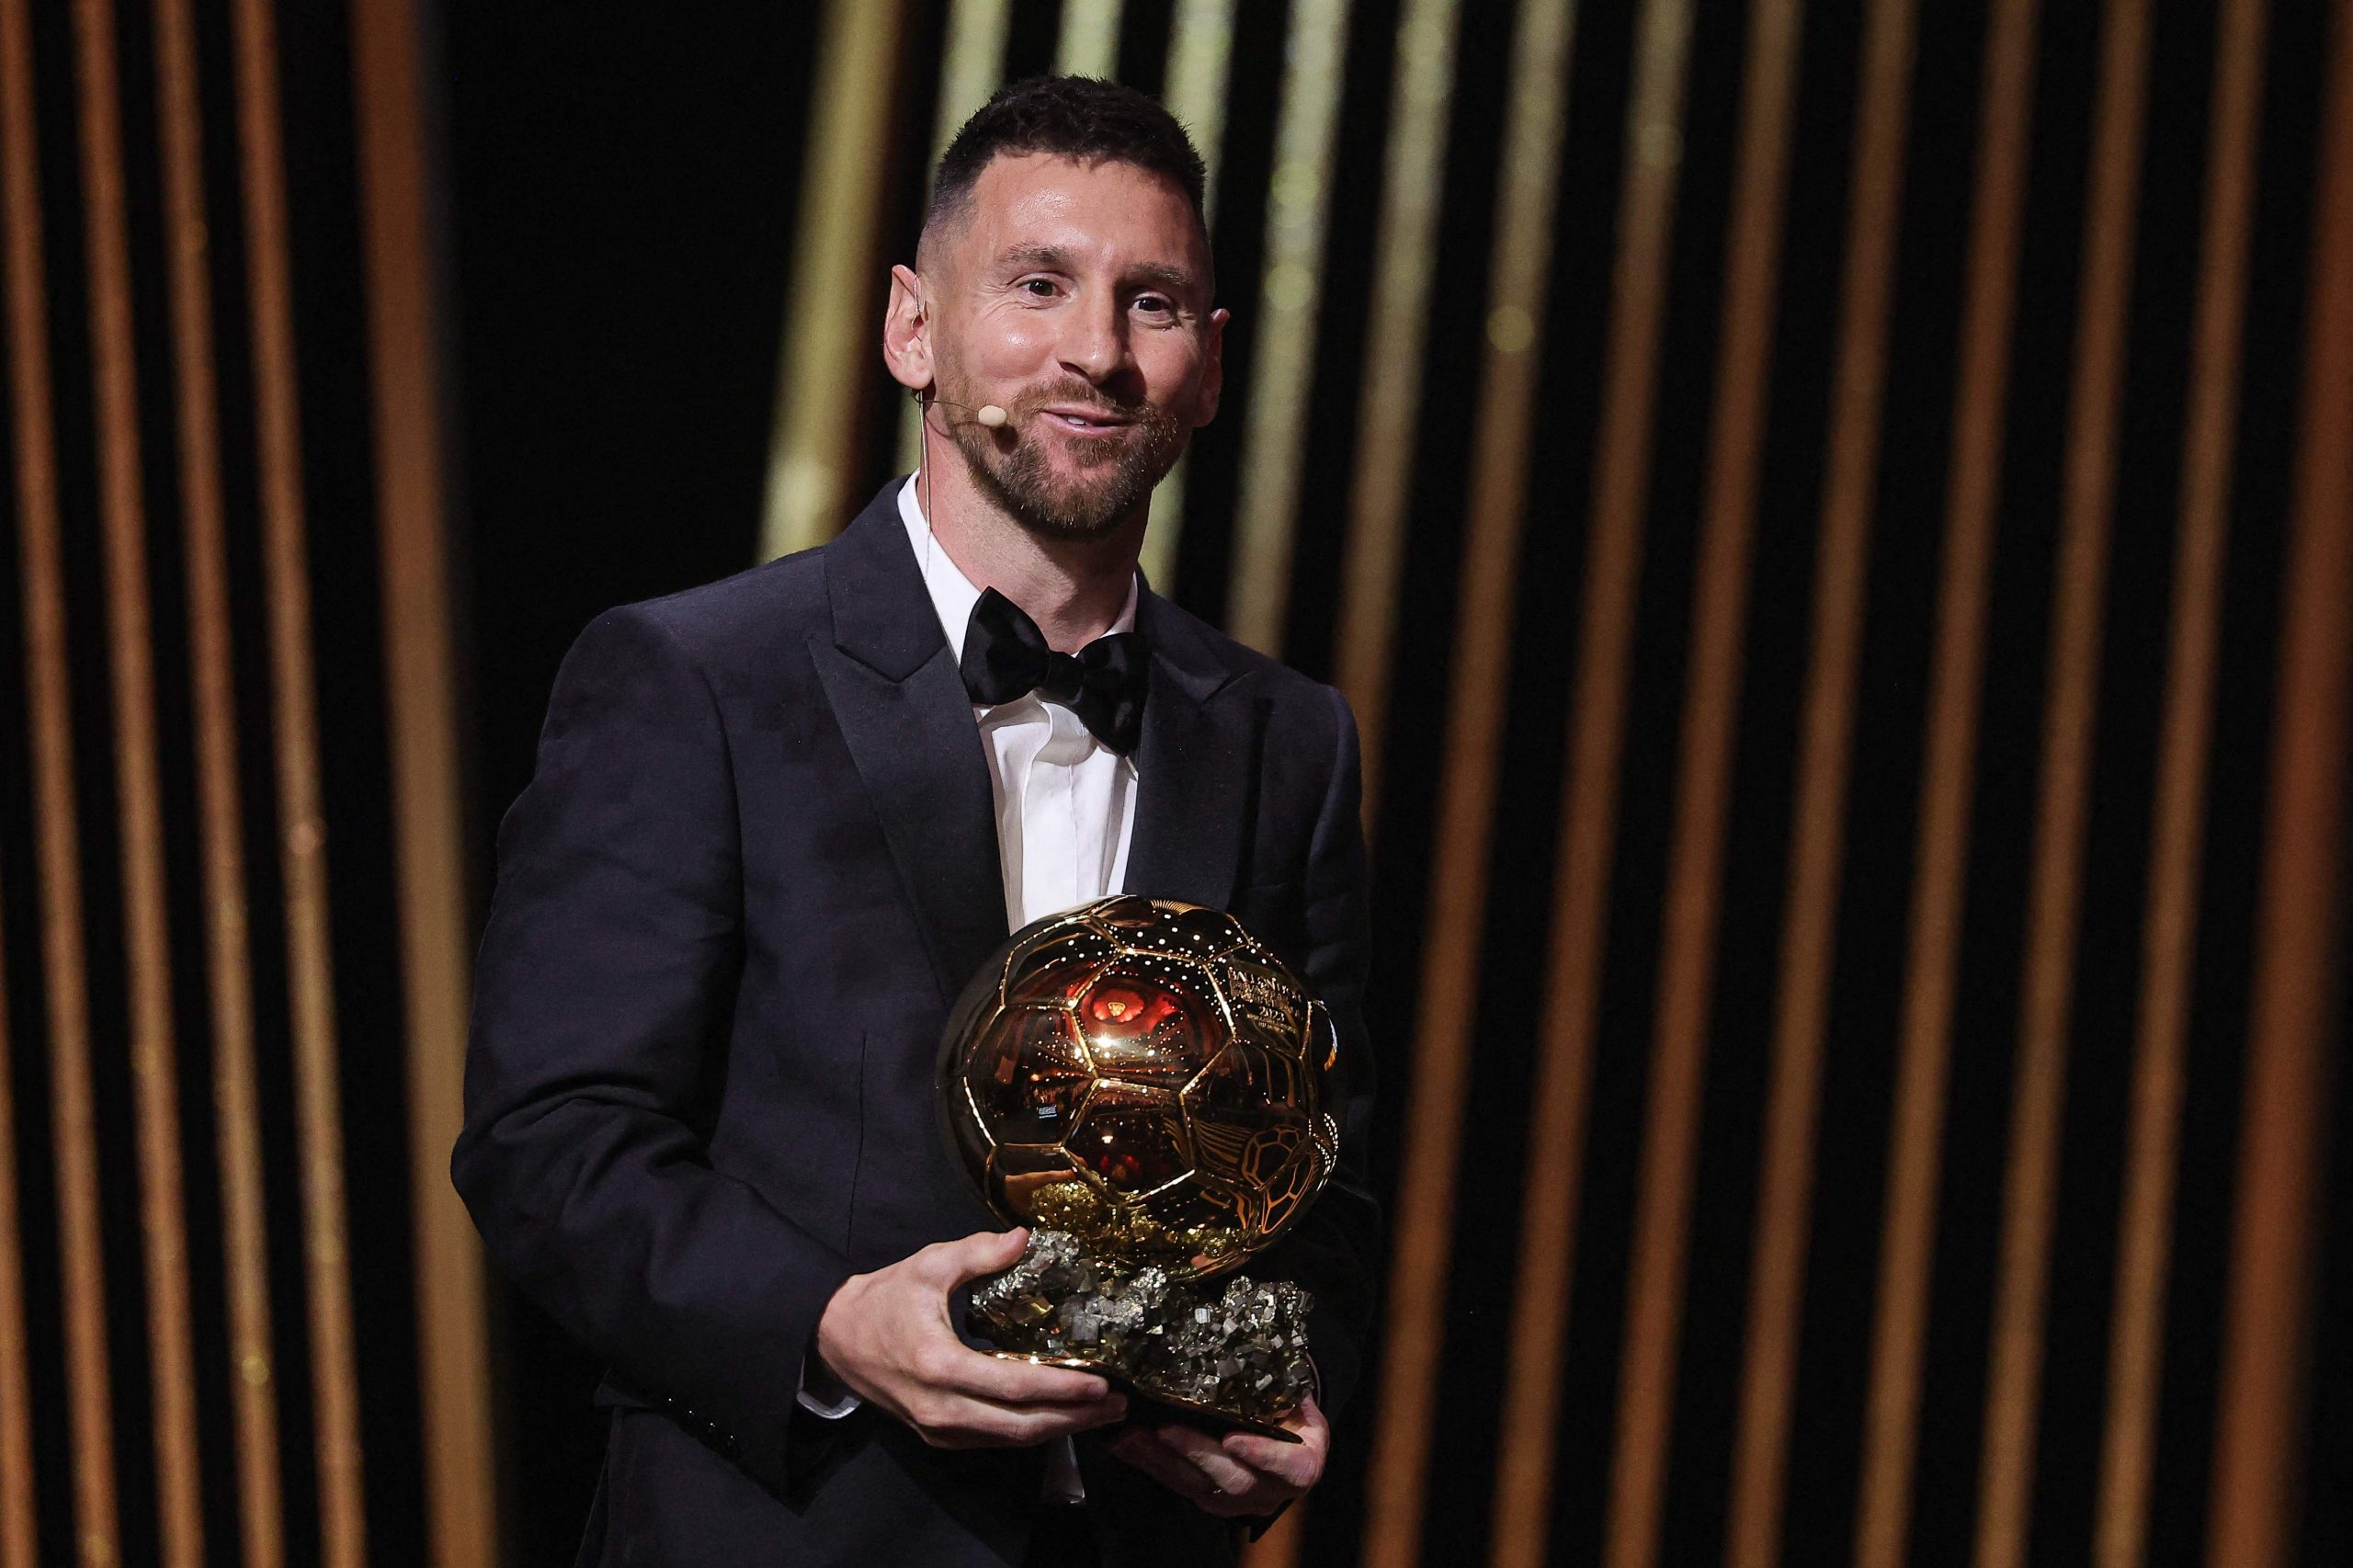 Amended all-time Ballon d’Or with Pele and Maradona released as Lionel Messi discovers who is the OFFICIAL goat